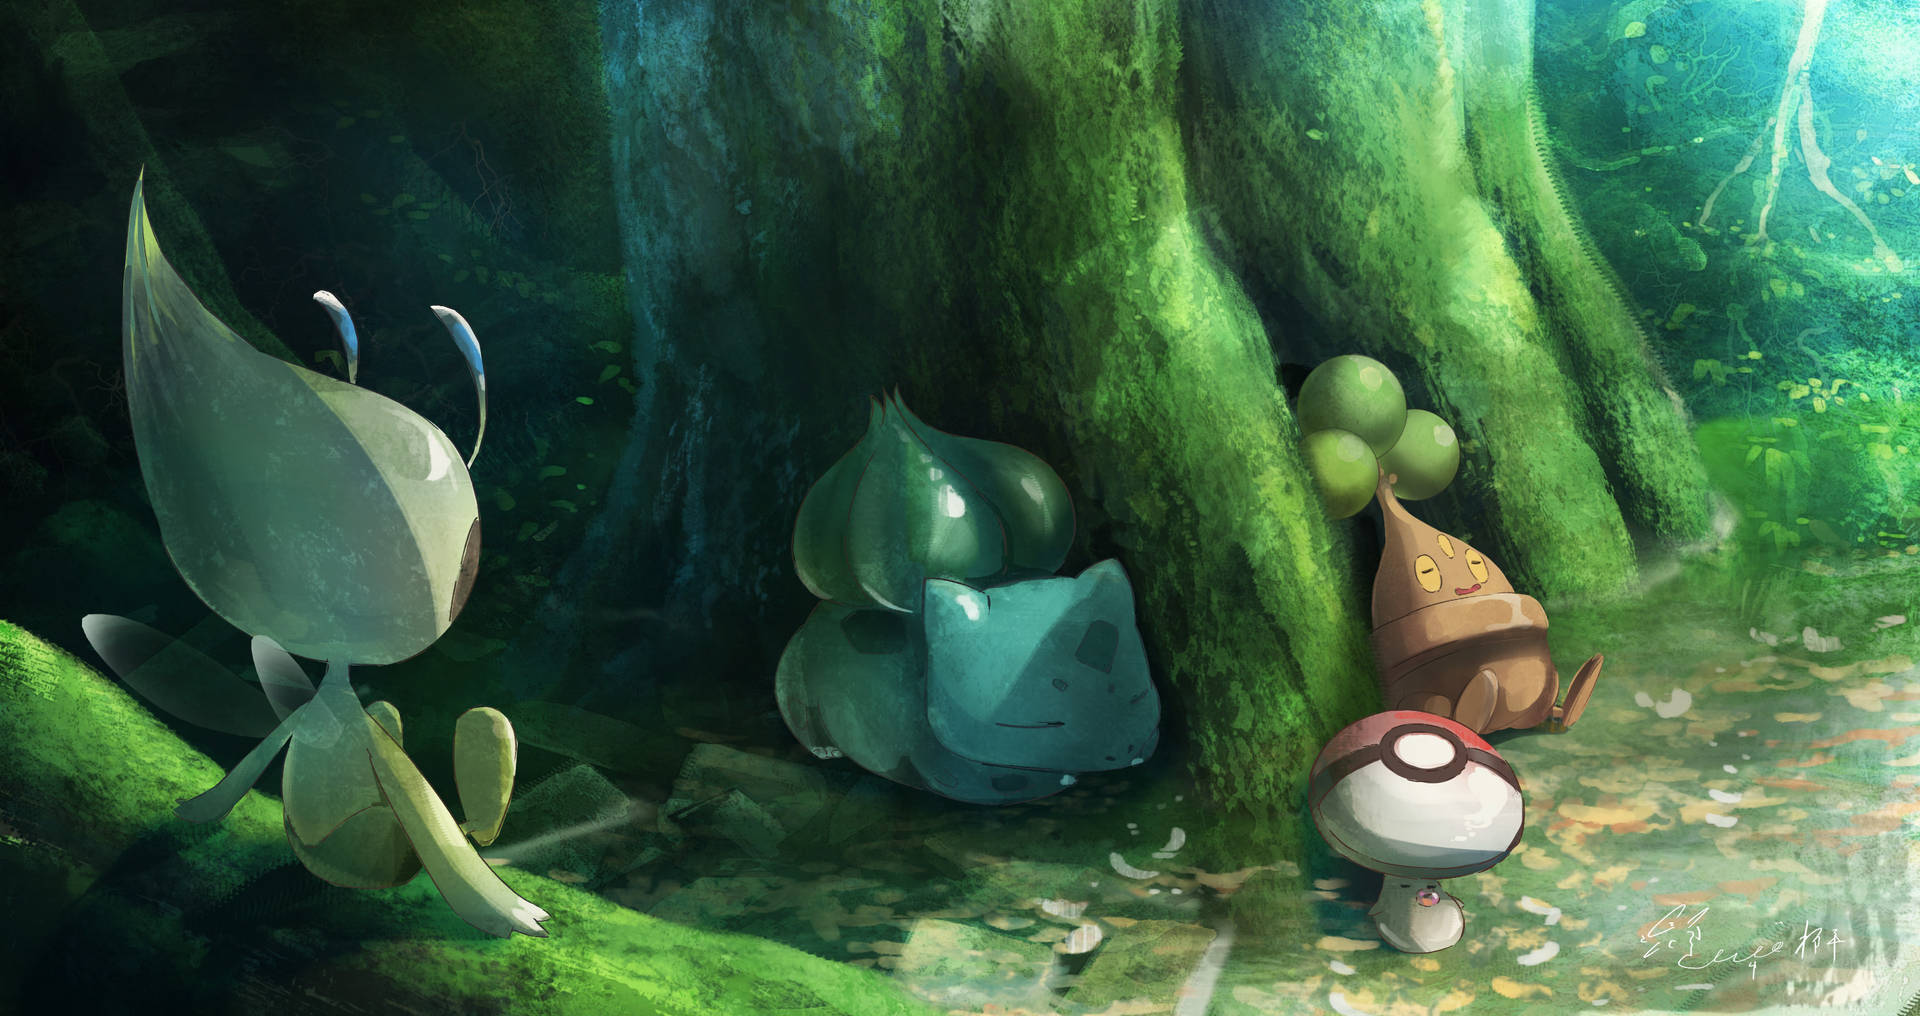 Bulbasaur 3506X1855 Wallpaper and Background Image